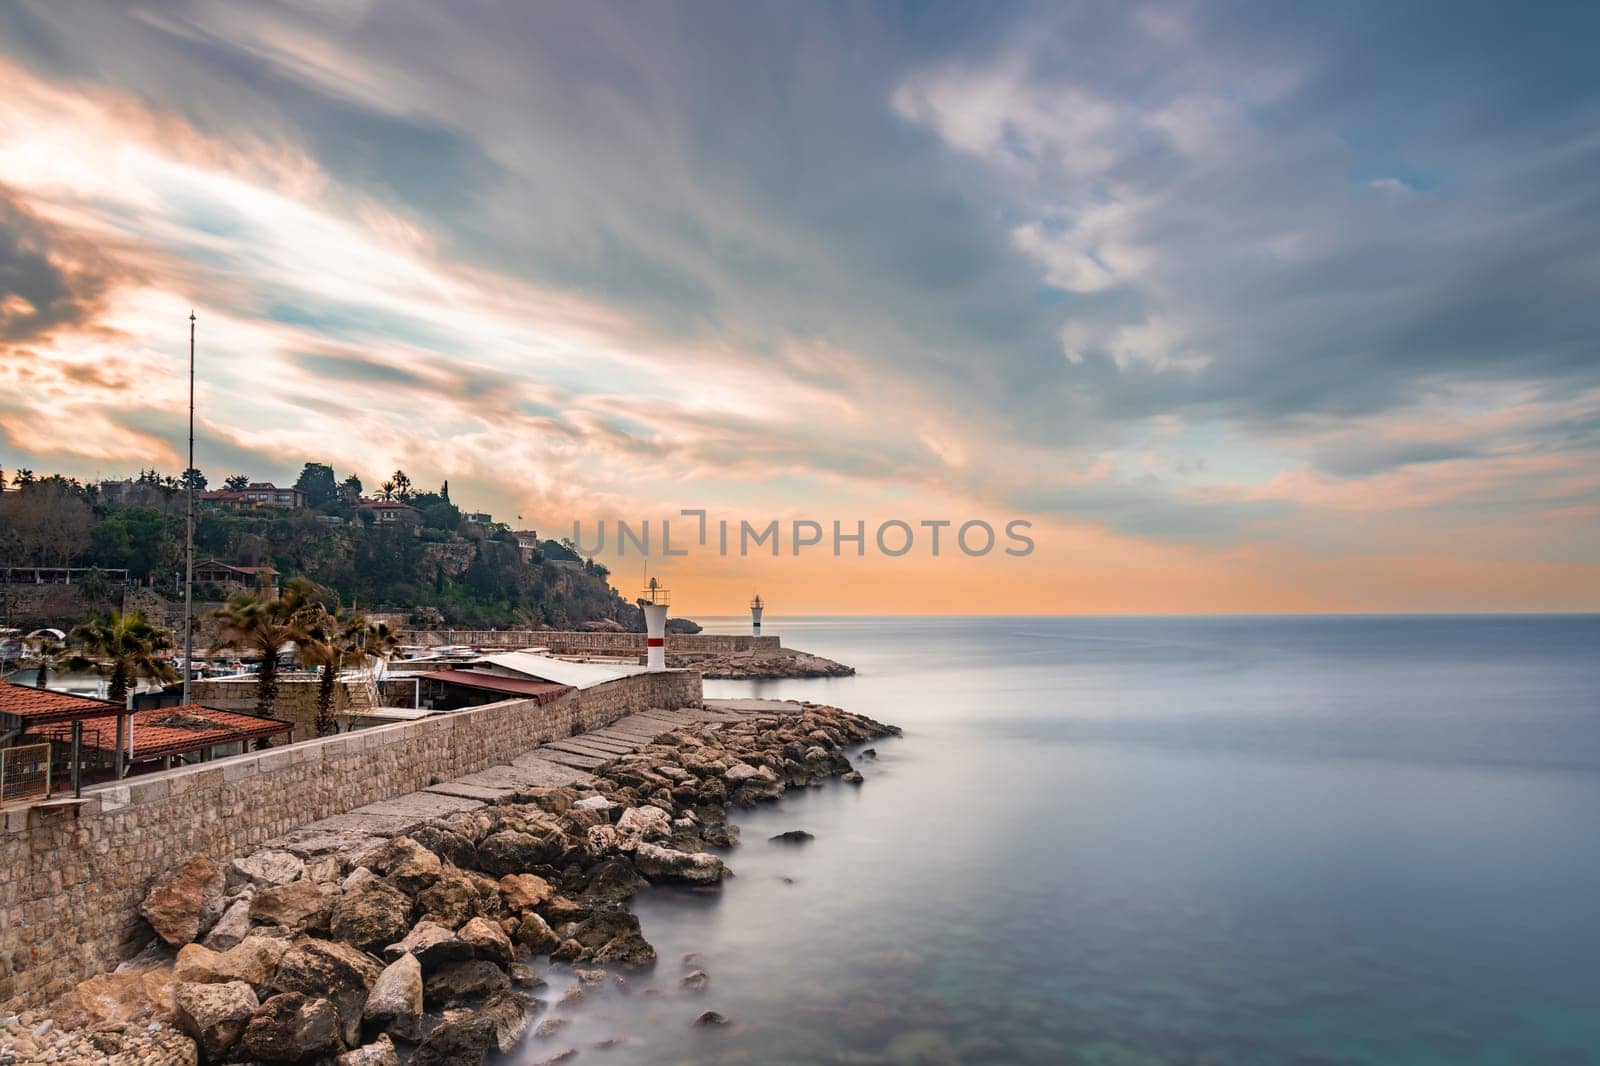 Antalya Old Town marina entrance photographed at sunrise with long exposure technique by Sonat